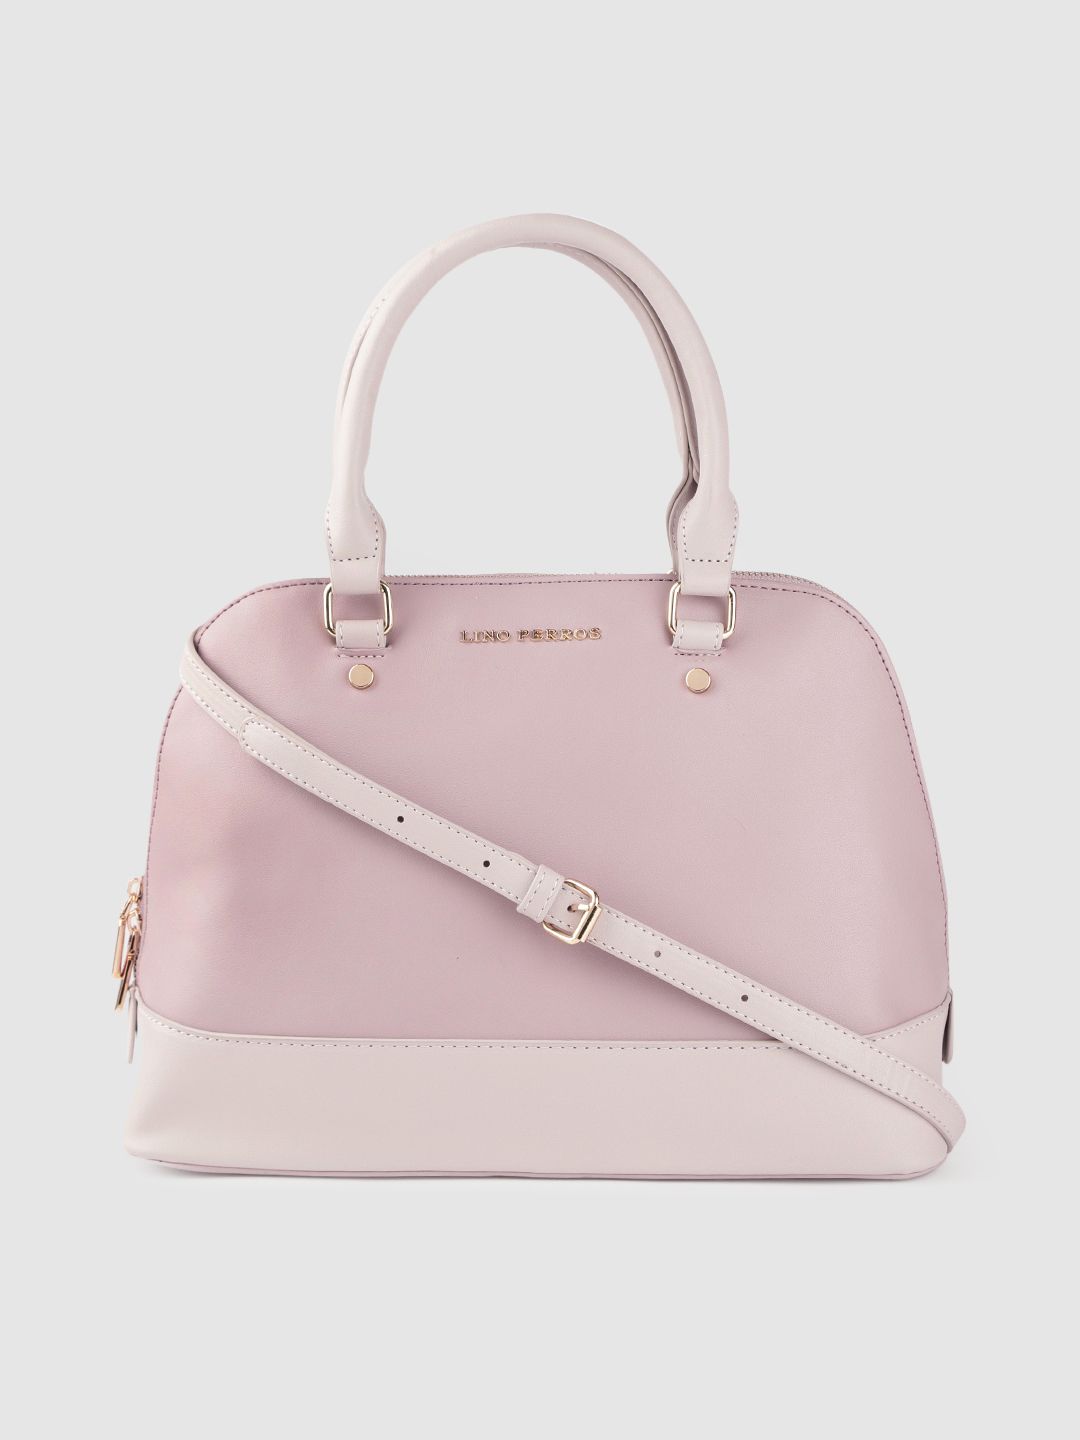 Lino Perros Dusty Pink & Beige Colourblocked Handheld Bag with Detachable Sling Strap Price in India